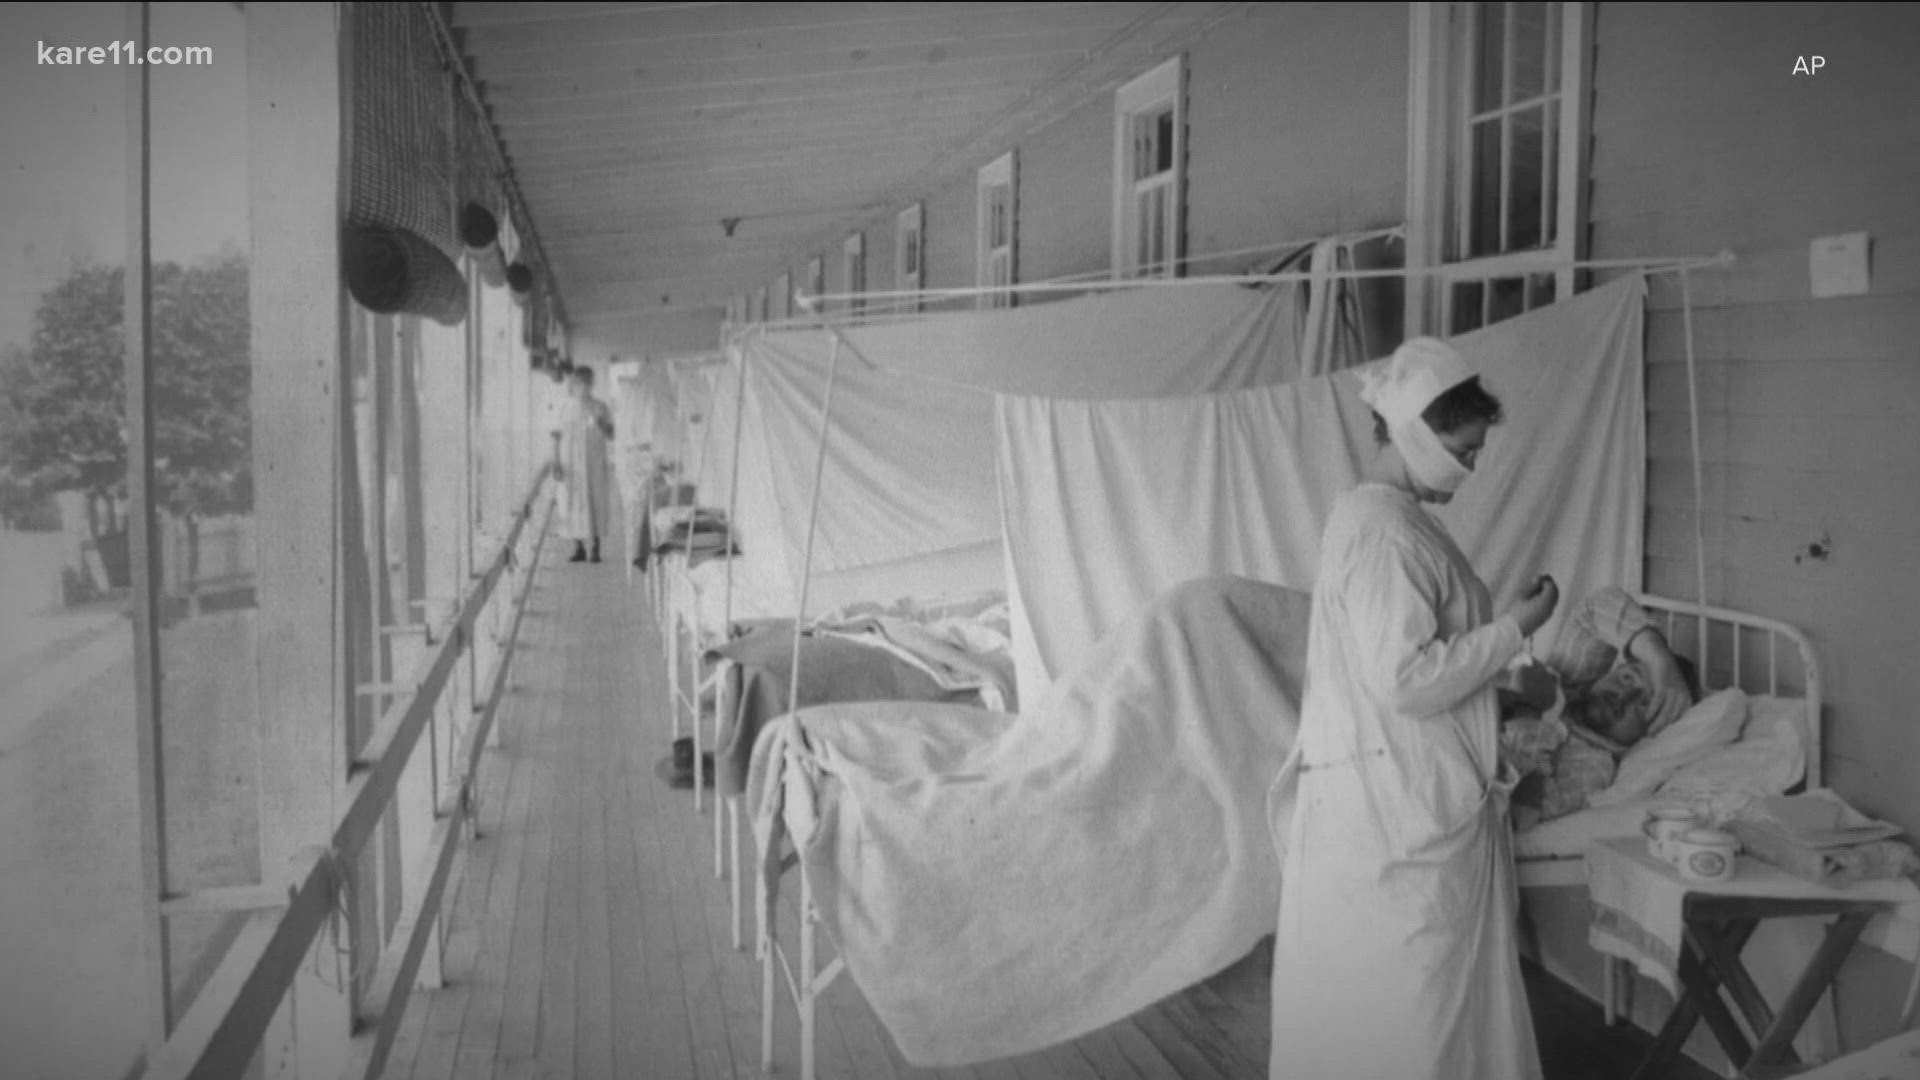 Worldwide the 1918 Flu Pandemic was still far more deadly with more than 50-million deaths.